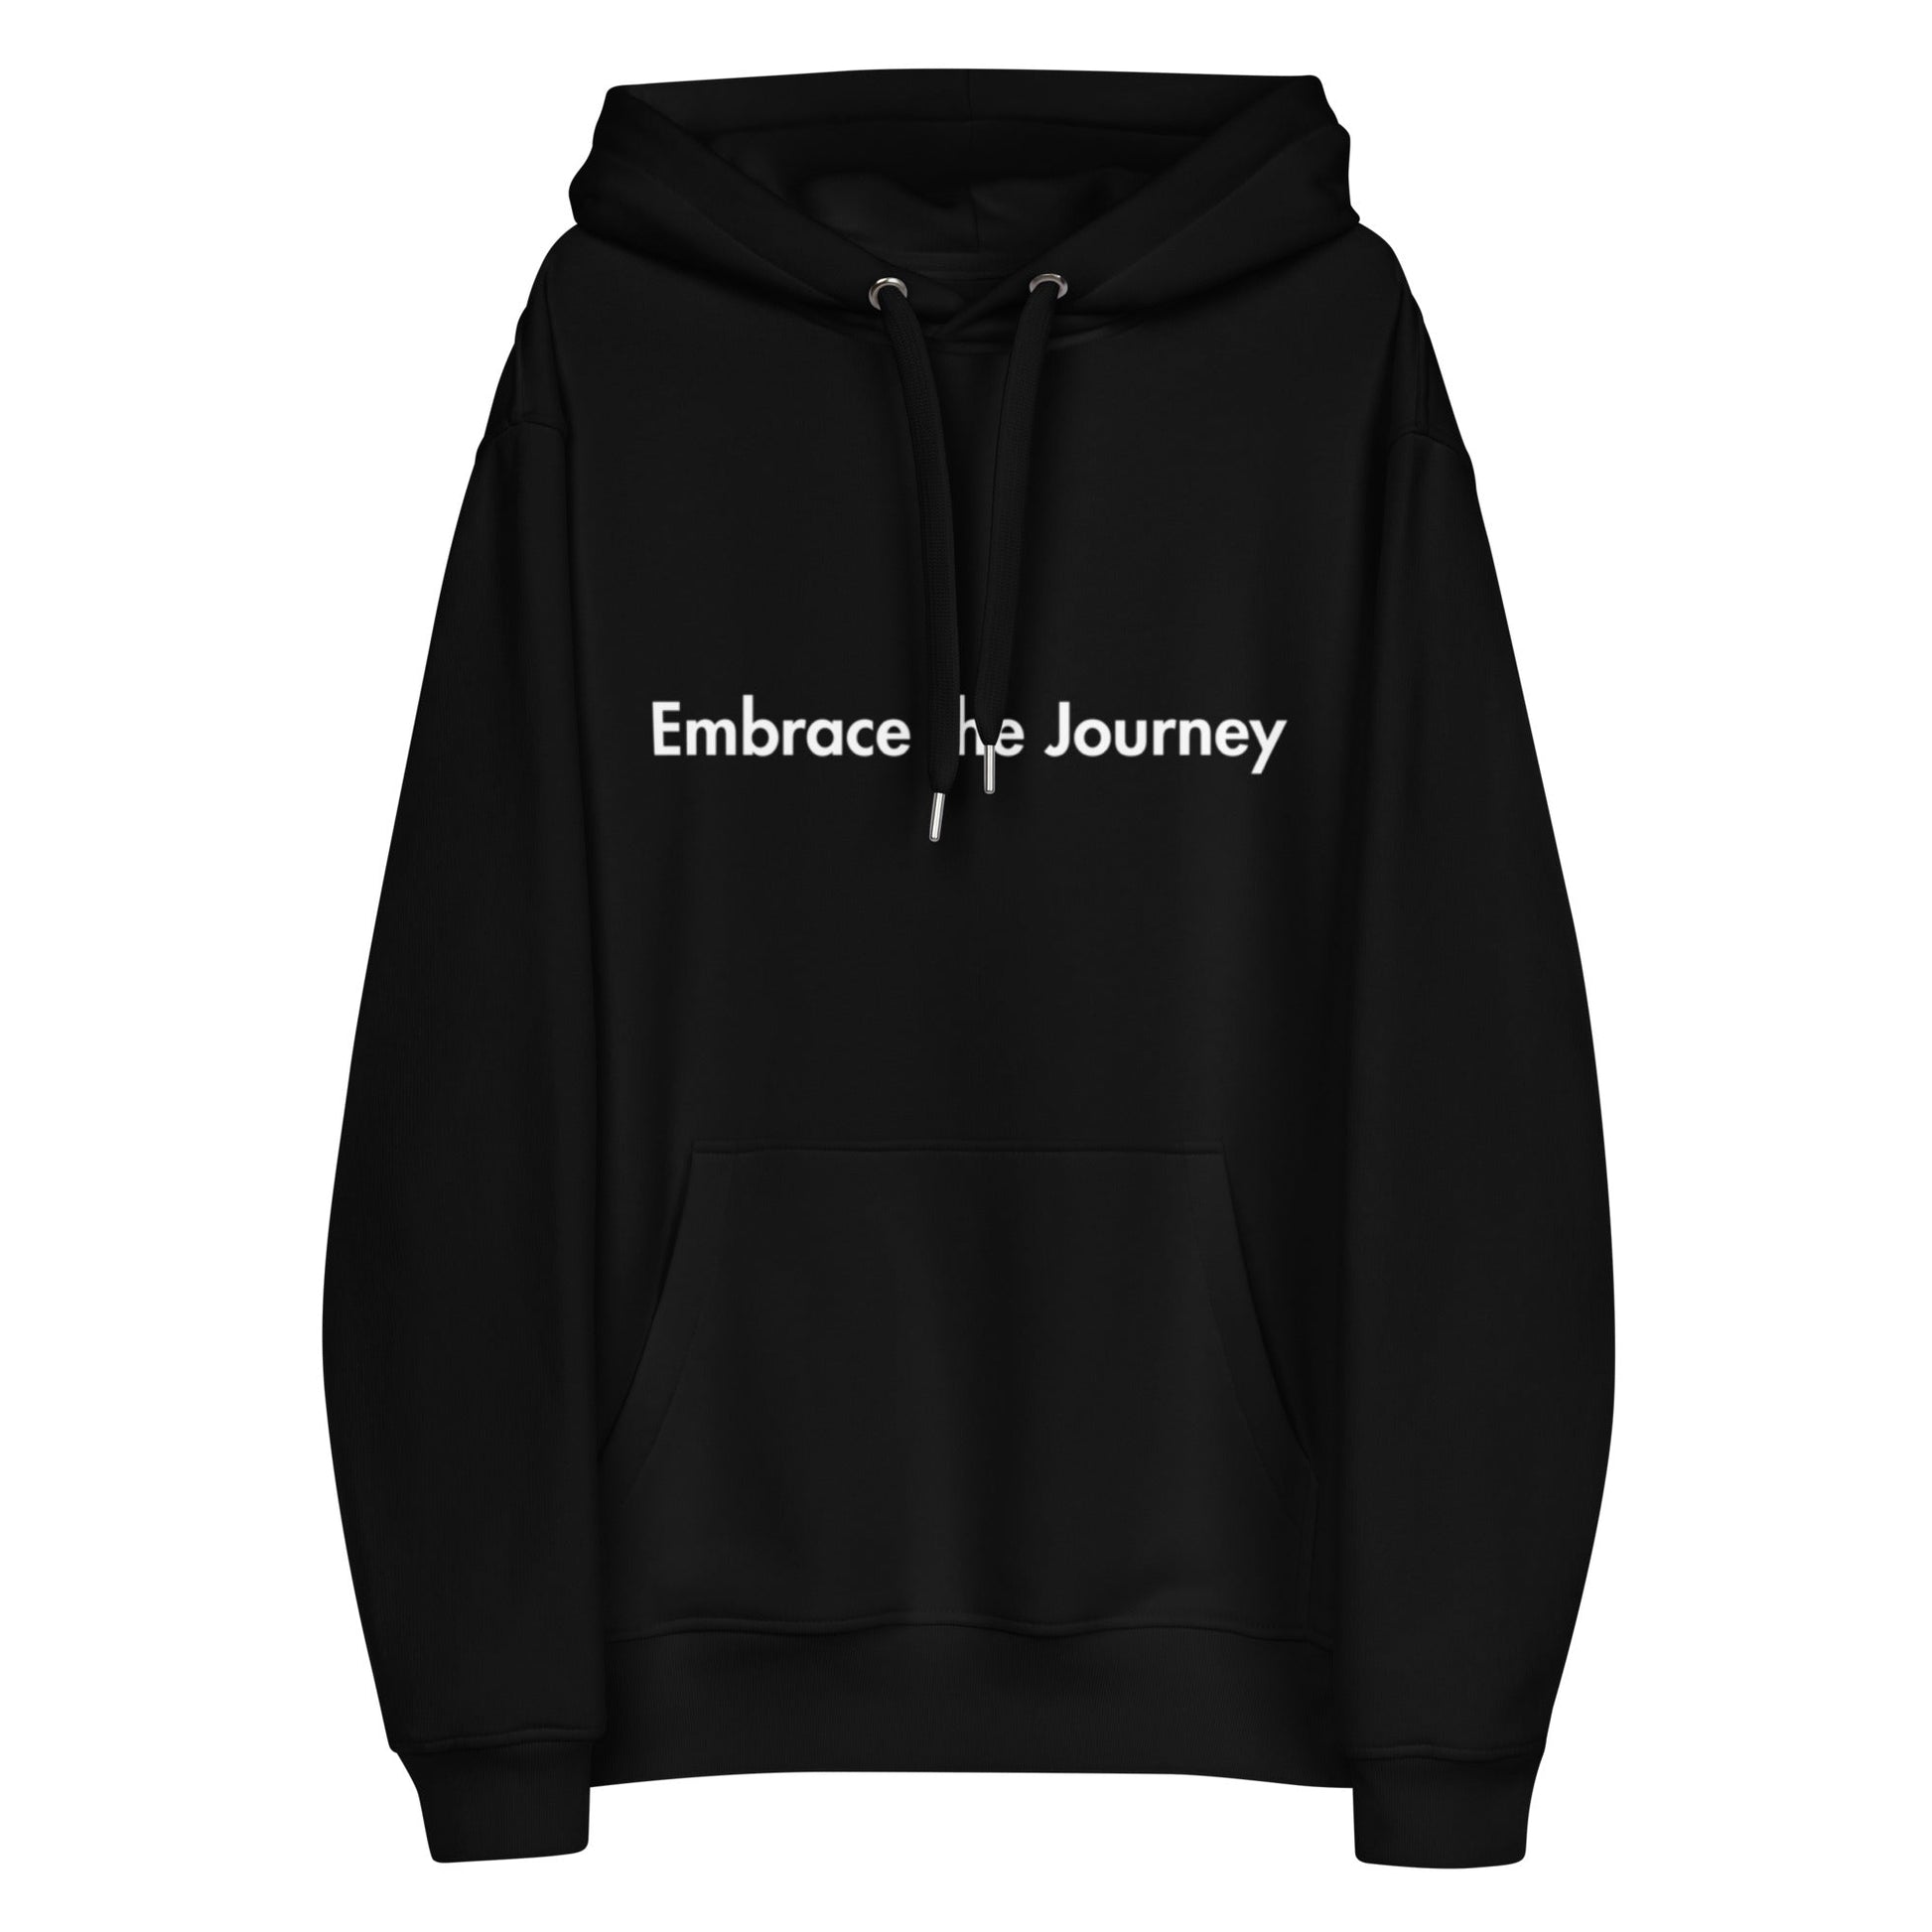 'Embrace the Journey' Hoodie Black - ROSE Society